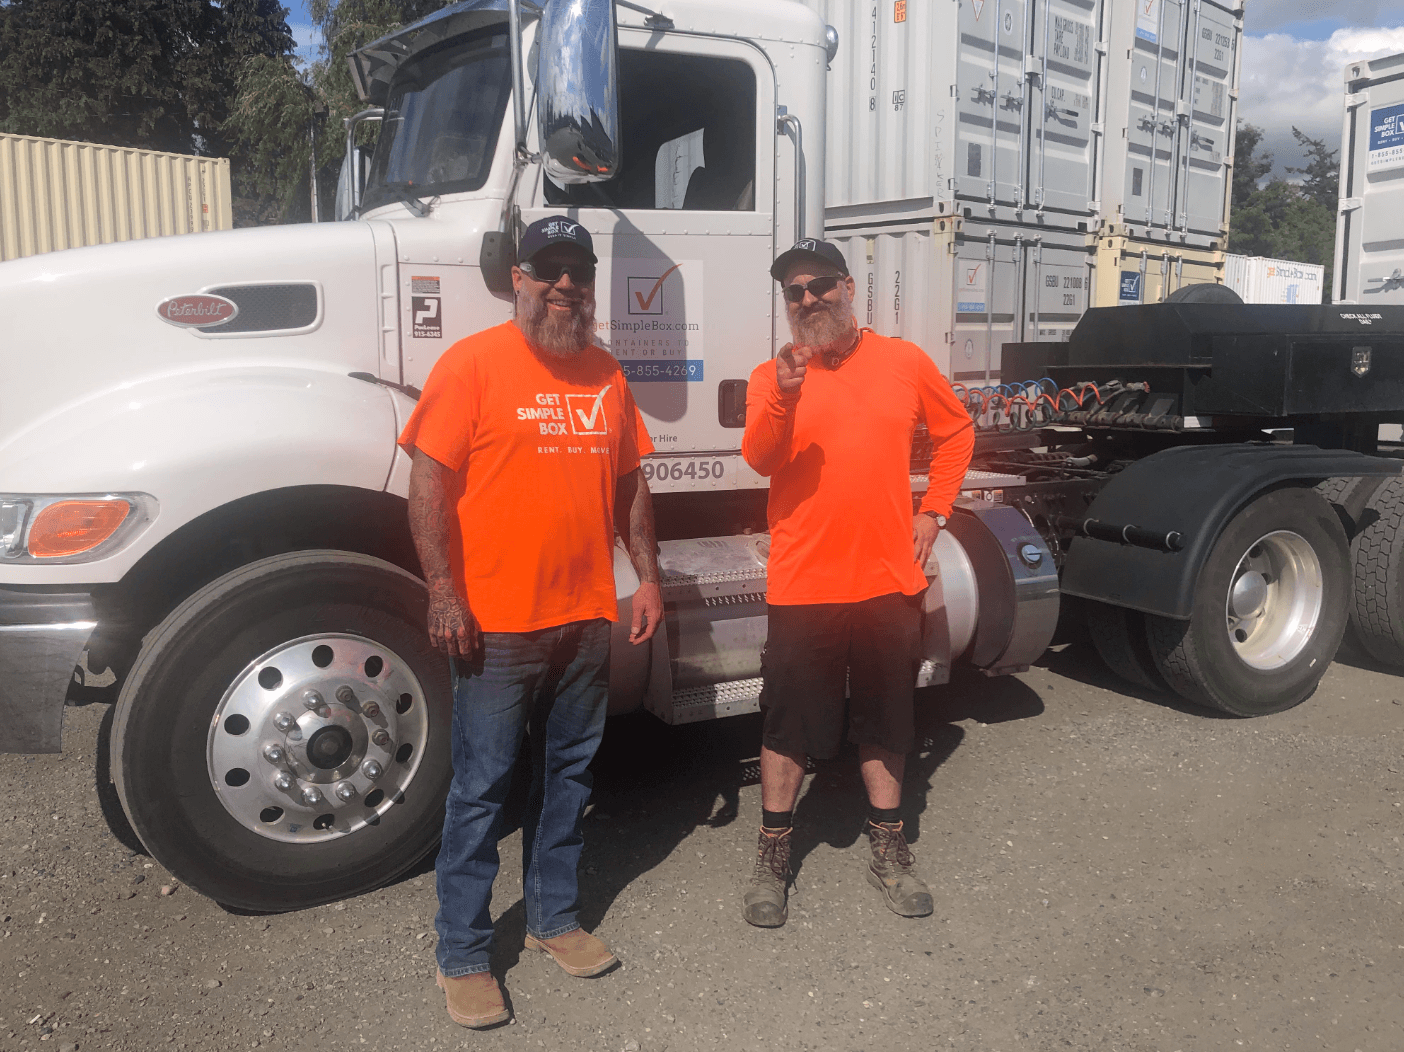 Two drivers from Get Simple Box with an orange shirt getting ready to deliver a small shipping container to someone who wanted to buy a small shipping container.